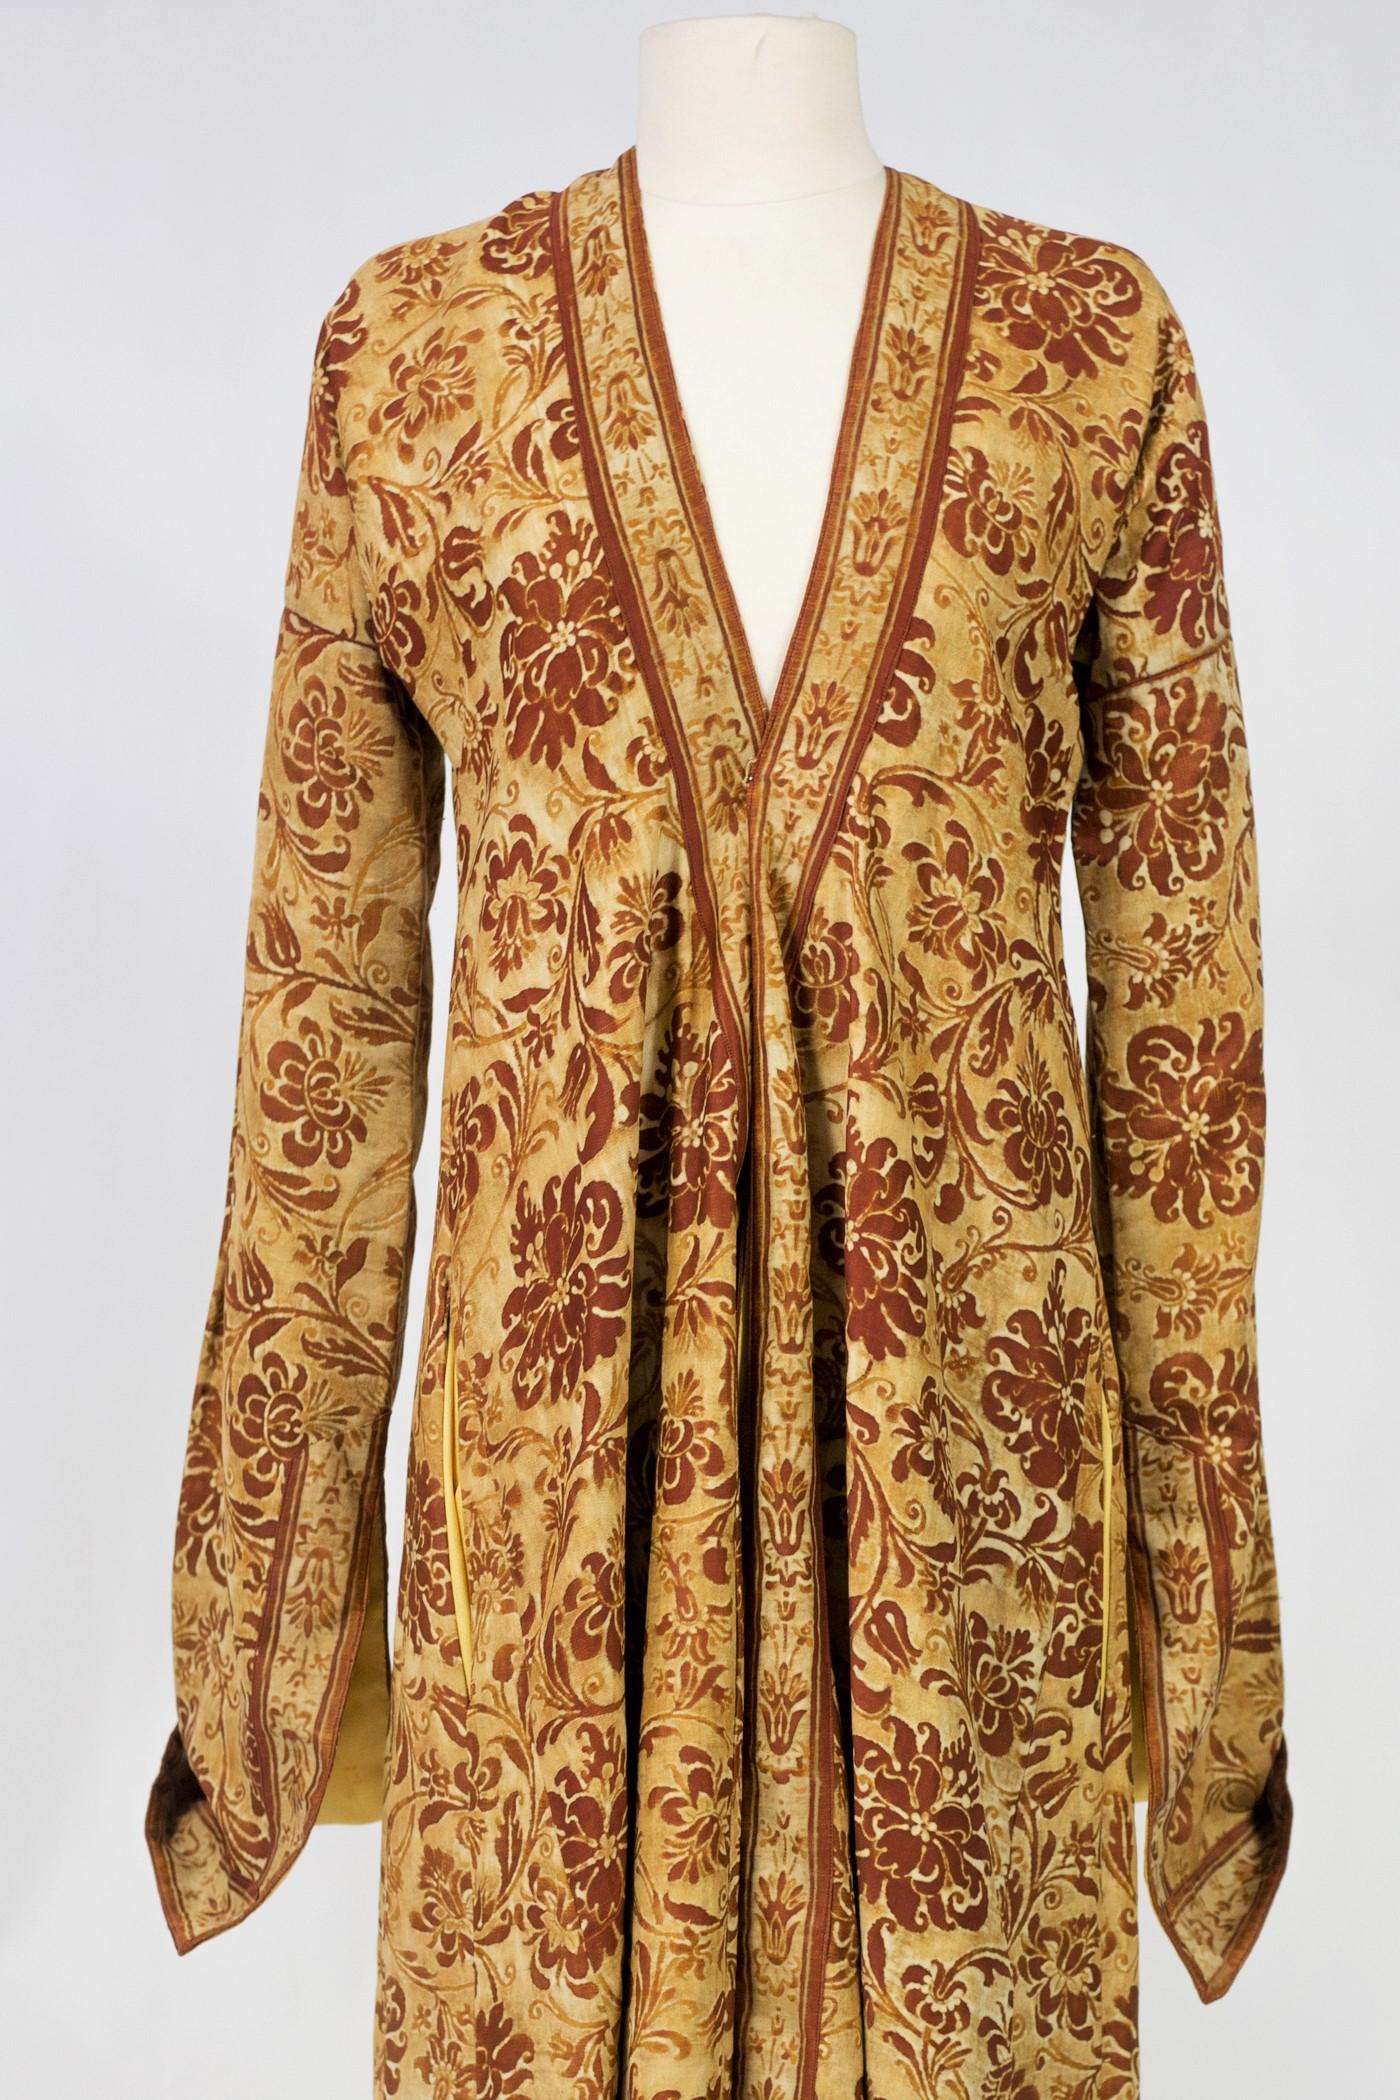 Circa 1950

Europe or Middle East

Elegant evening or interior coat in Kaftan cut made in a printed fabric by Mariano Fortuny Venice circa 1950. Straight cut, long and slit at the cuffs and at the bottom of the coat. Two side slit pockets. Cotton